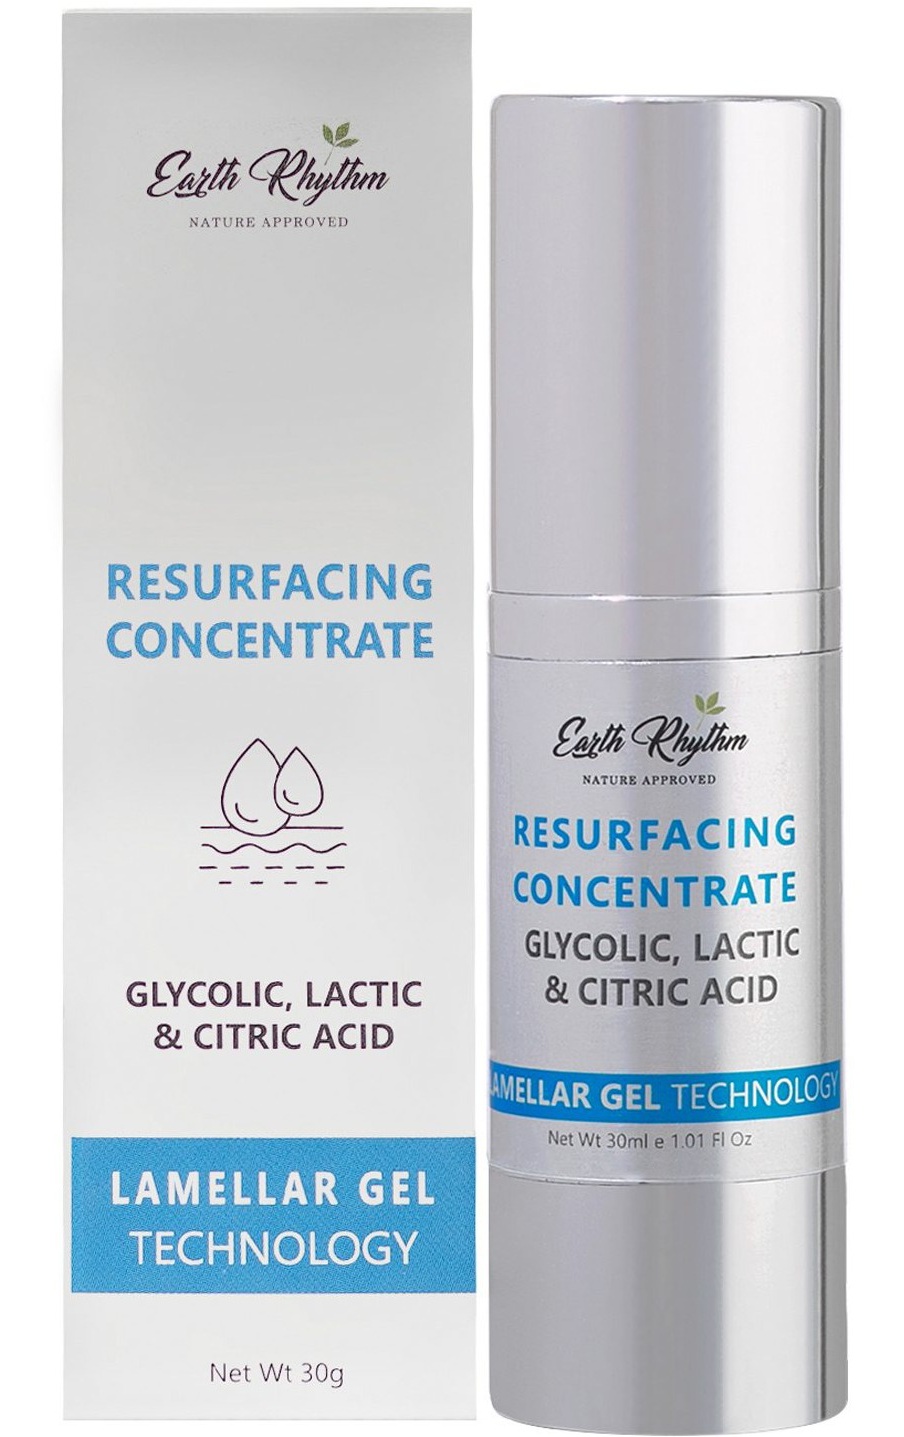 Earth Rhythm Resurfacing Concentrate Glycolic, Lactic & Citric Acid